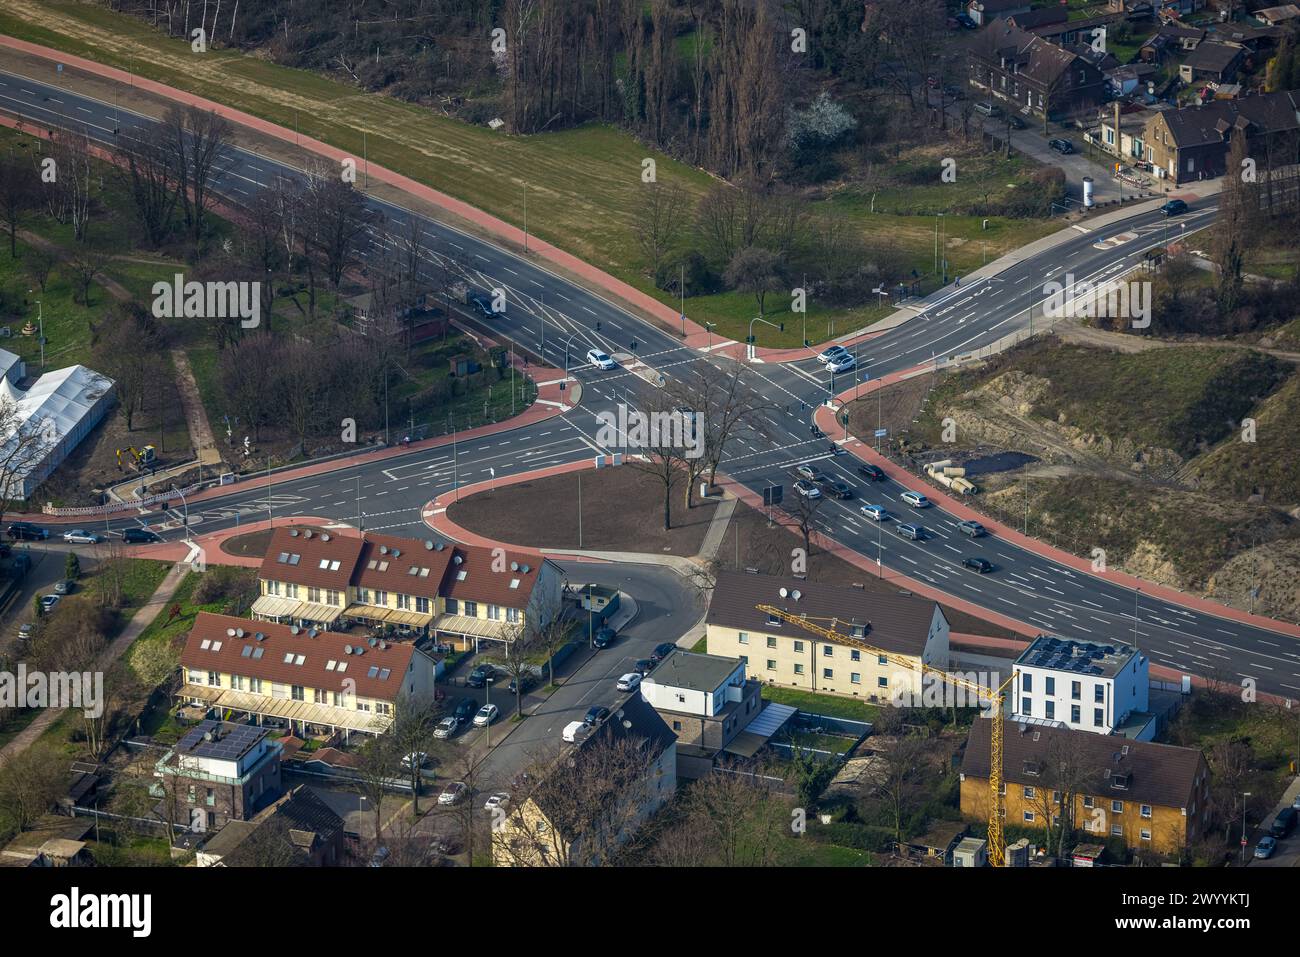 Aerial view, redesign of the intersection of Fritz-Schupp-Straße and Warbruckstraße, Marxloh, Duisburg, Ruhr area, North Rhine-Westphalia, Germany, Du Stock Photo